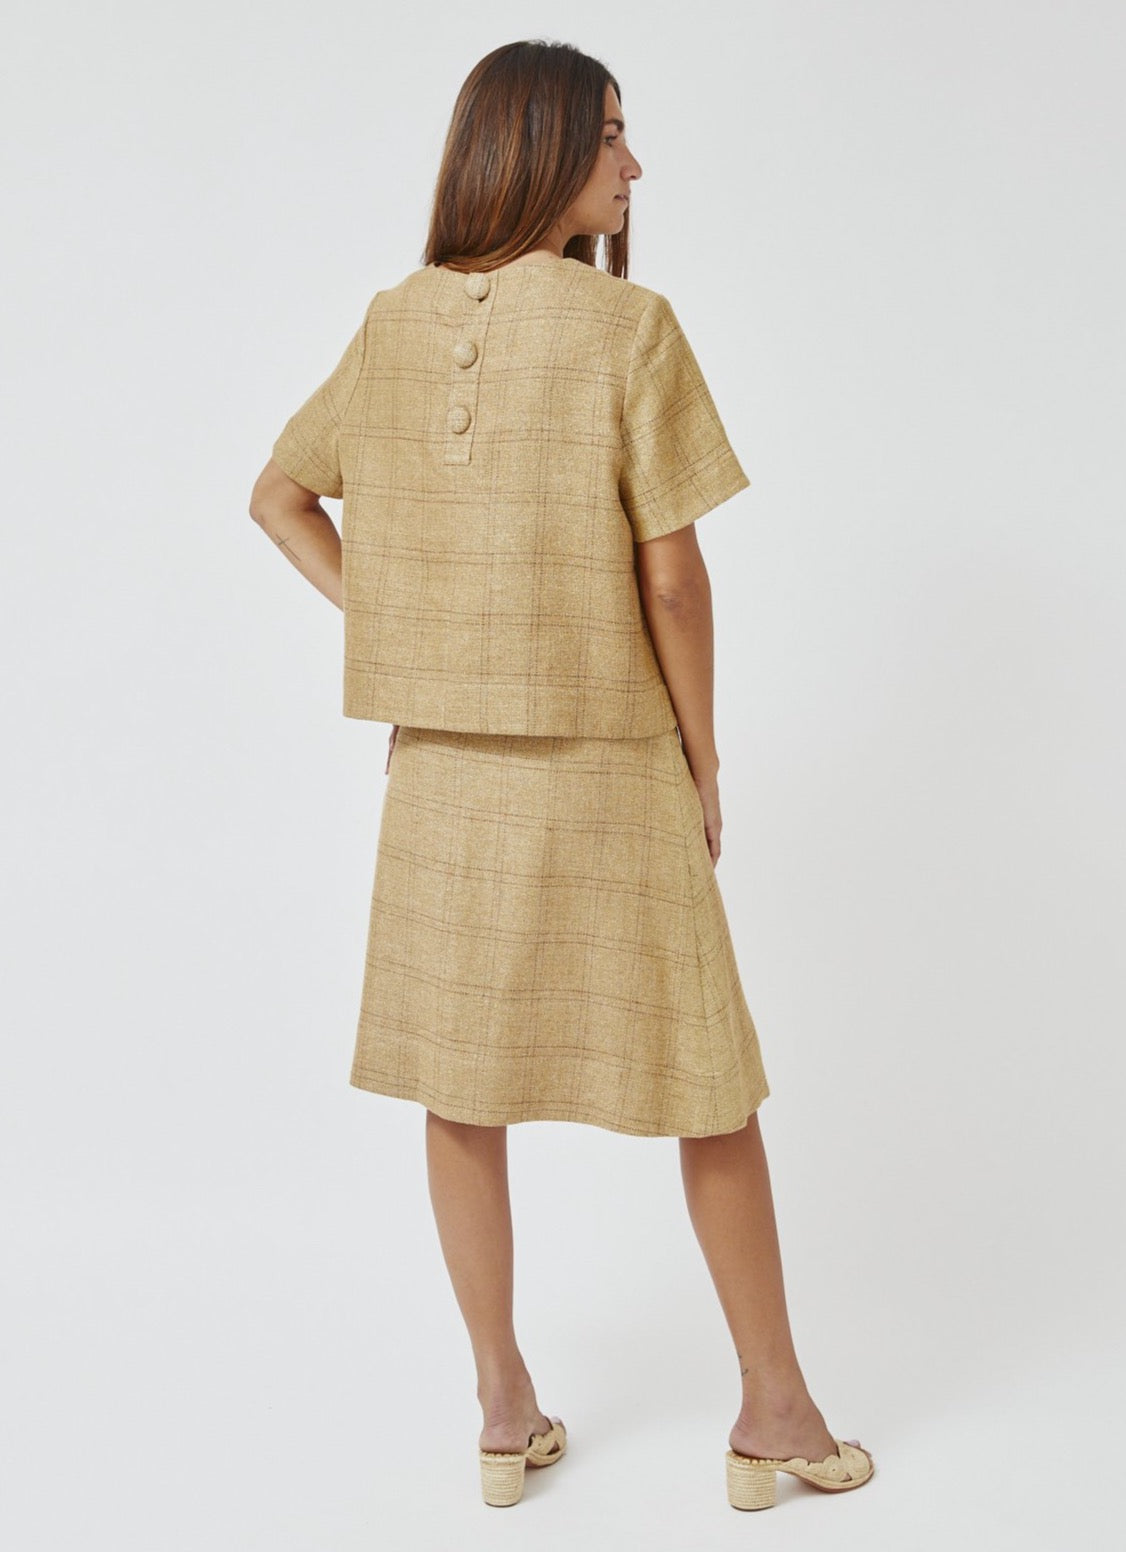 THE SCALLOP  A-LINE SKIRT in NATURAL WINDOWPANE BASKETWEAVE LINEN